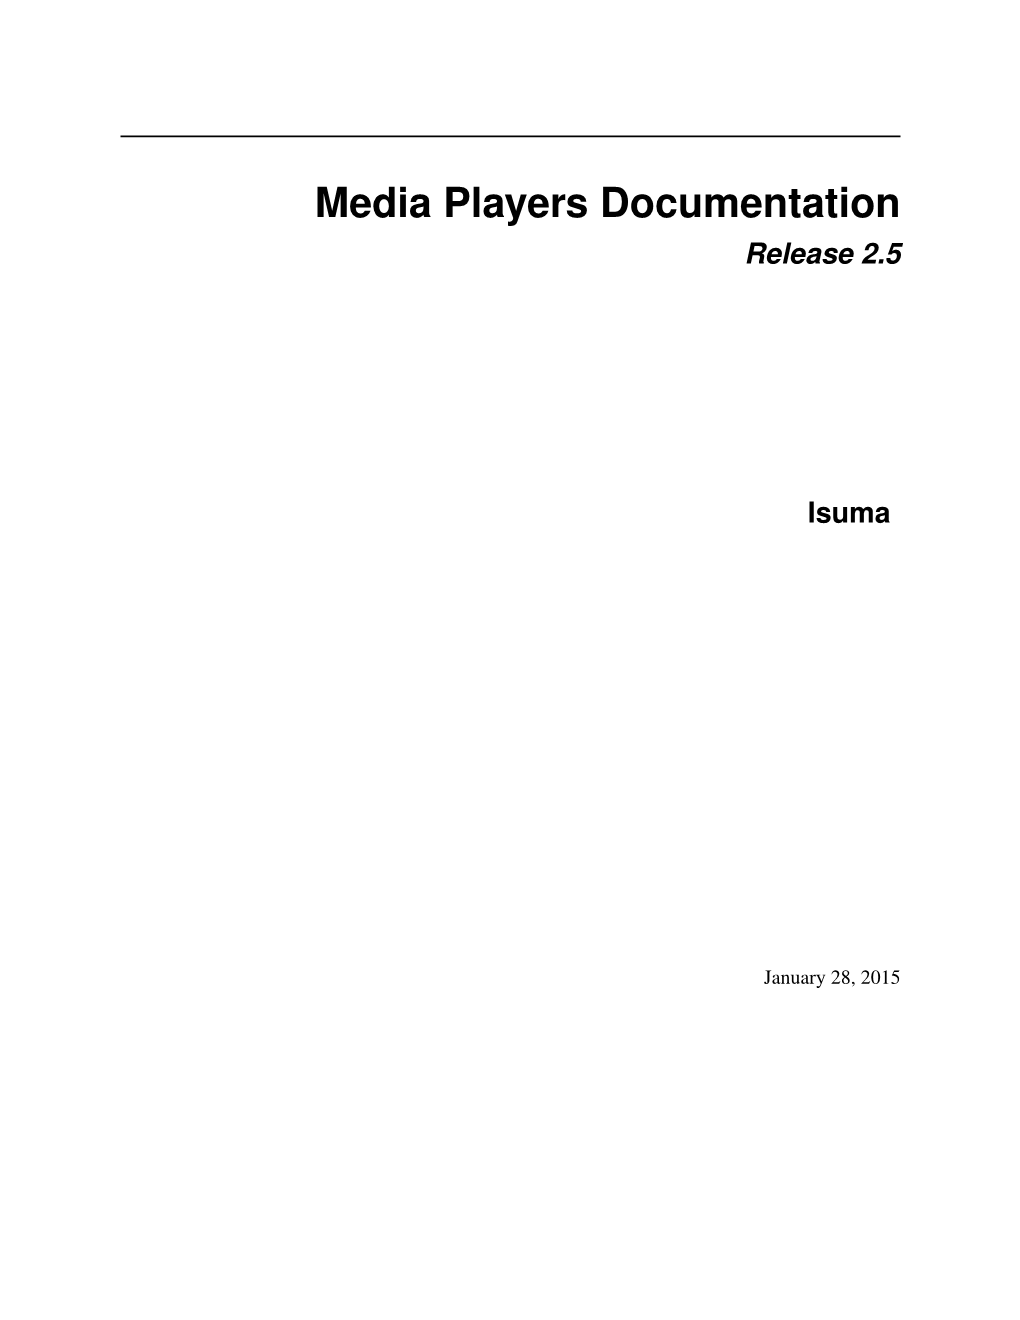 Media Players Documentation Release 2.5